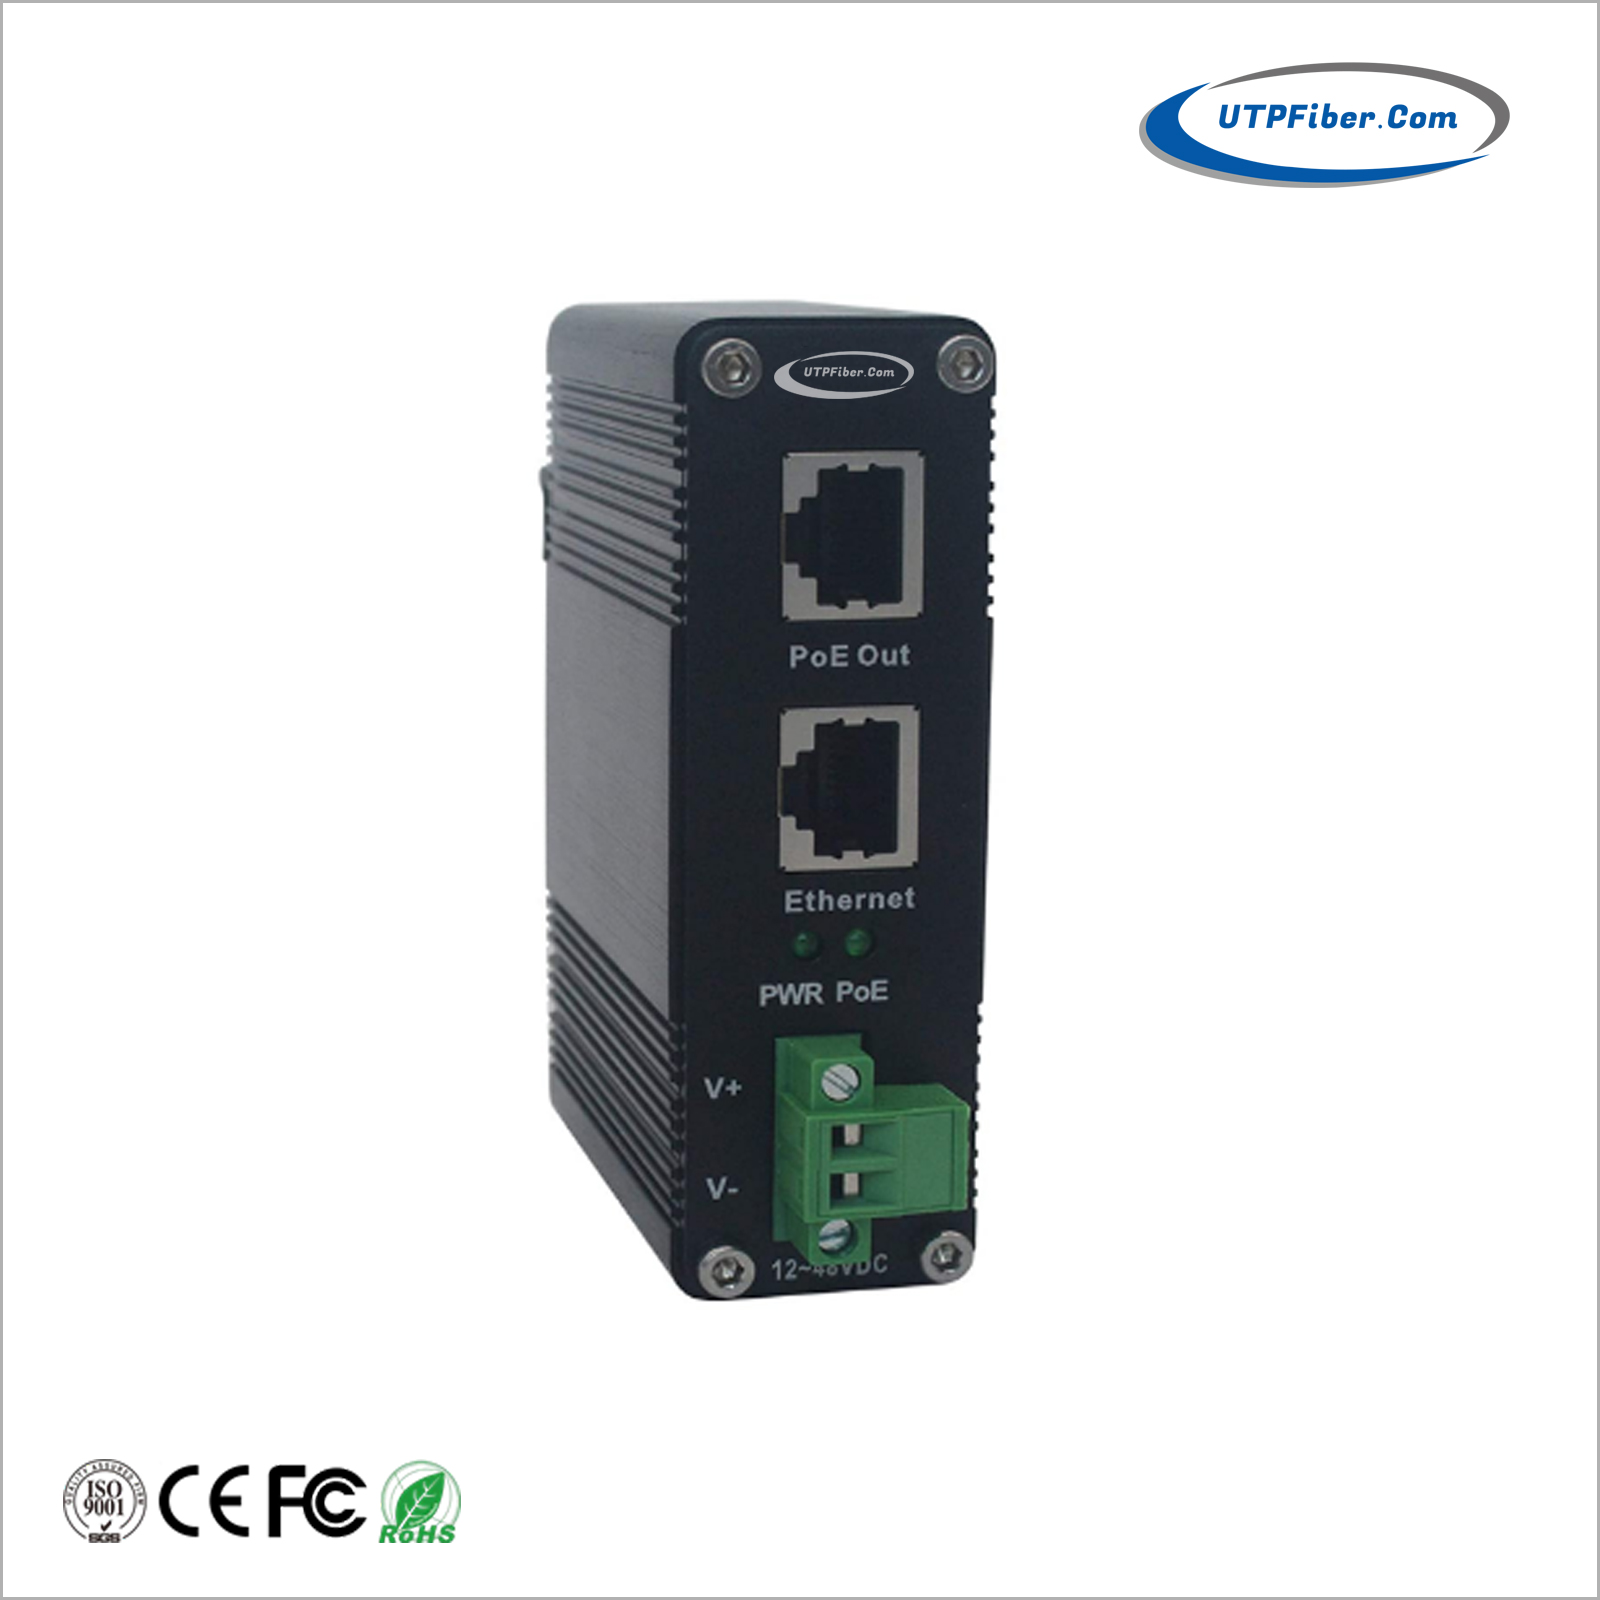 Industrial IEEE 802.3at Gigabit PoE+ Injector with 12~48VDC Power Input